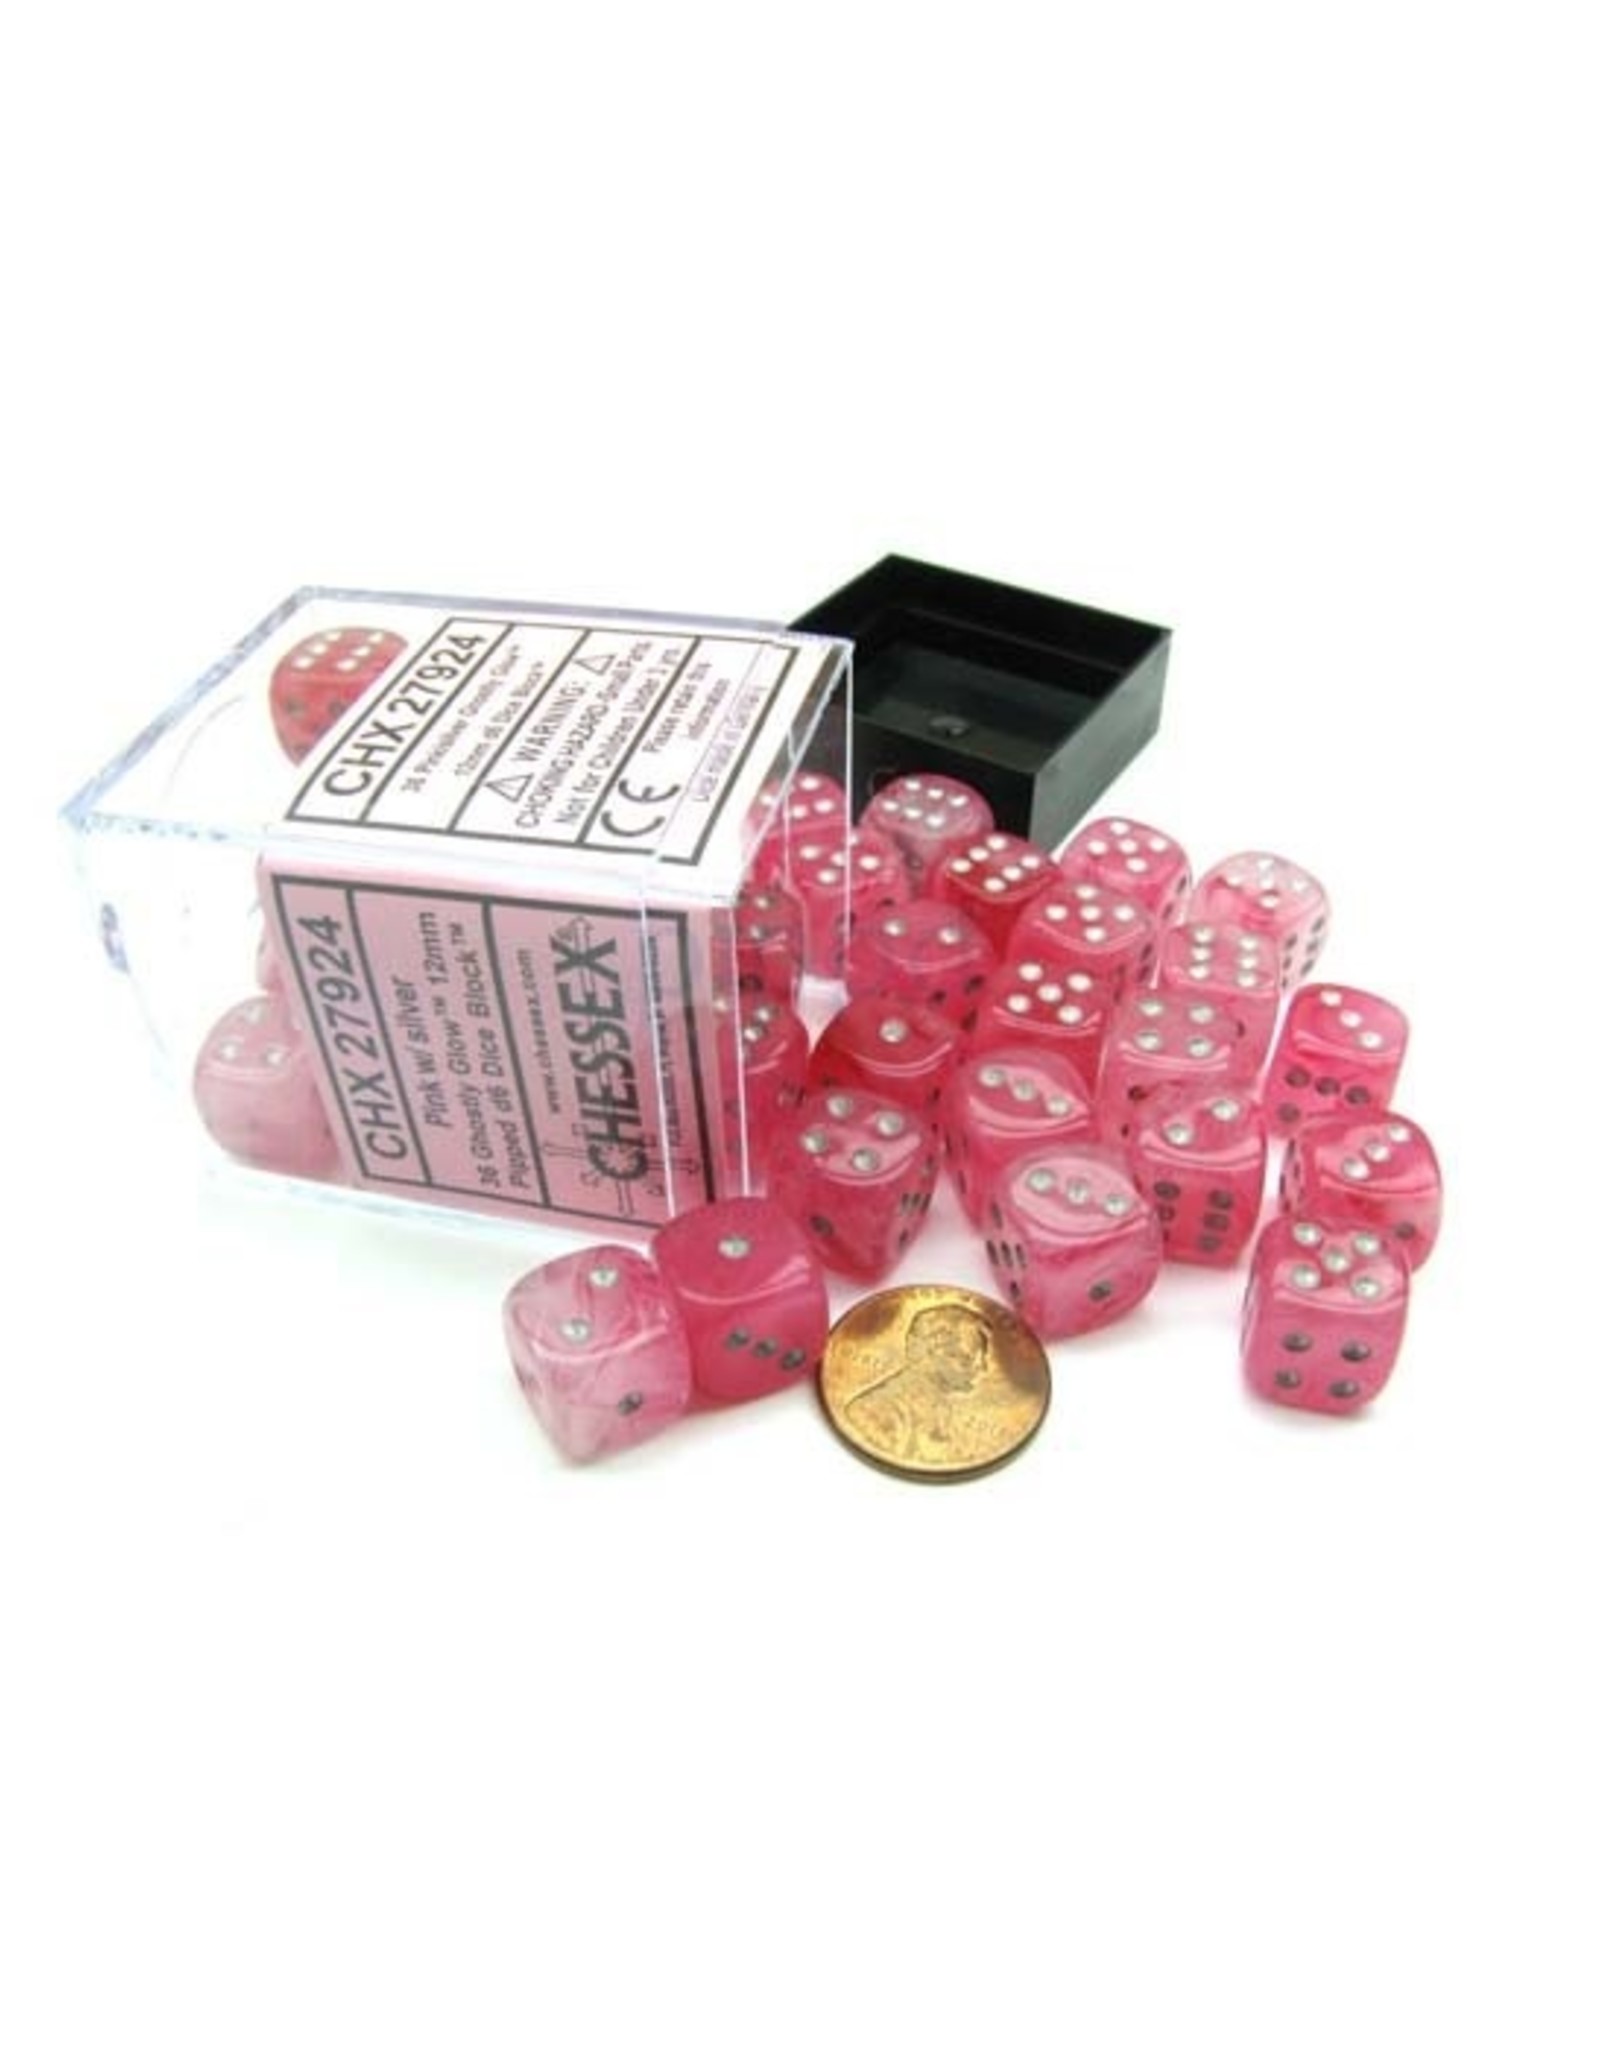 Chessex Chessex: 12mm D6 - Ghostly Glow - Pink w/ Silver